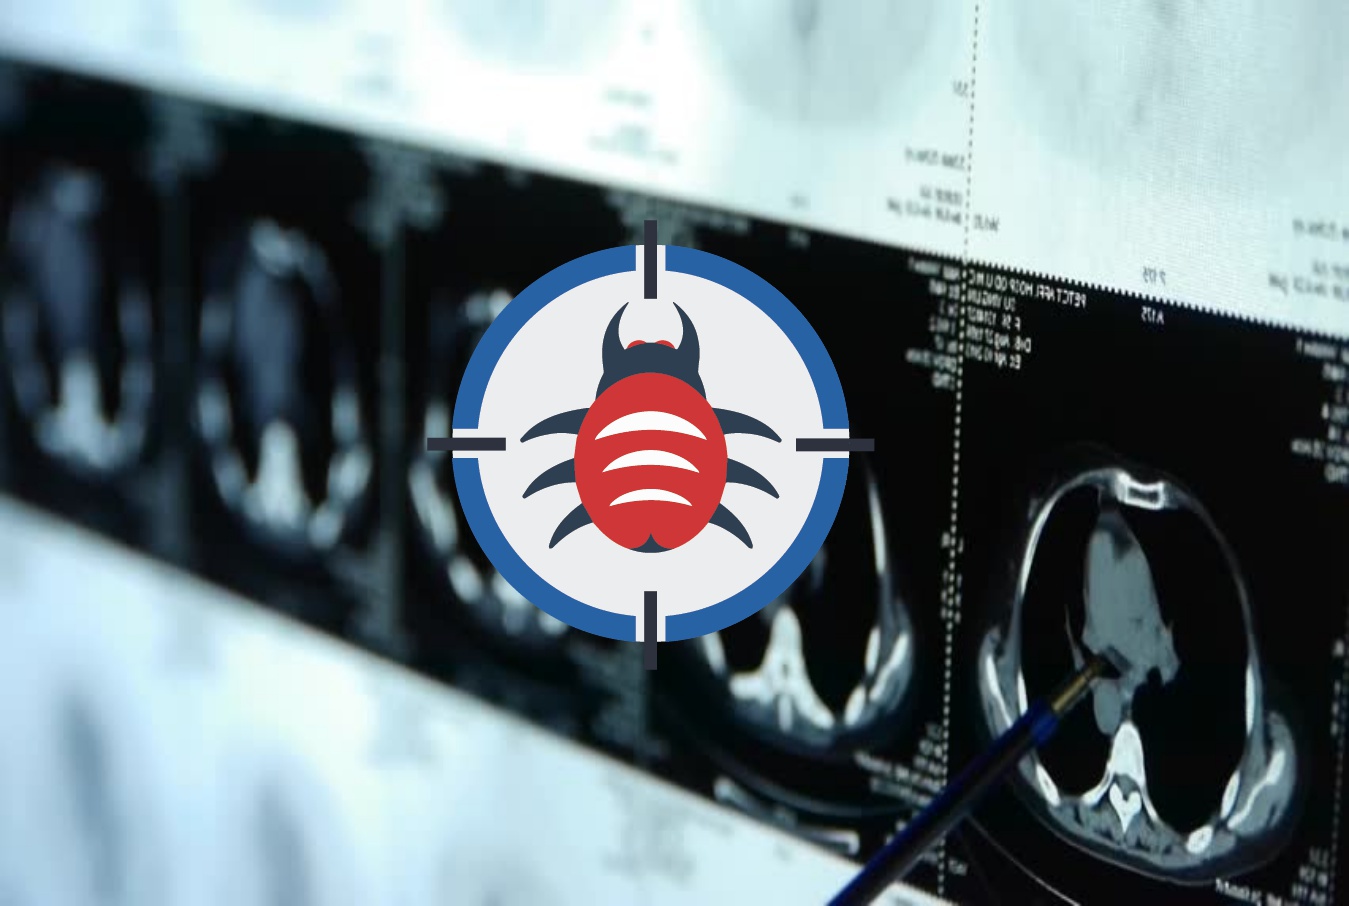 New malware can modify CT and MRI scan results